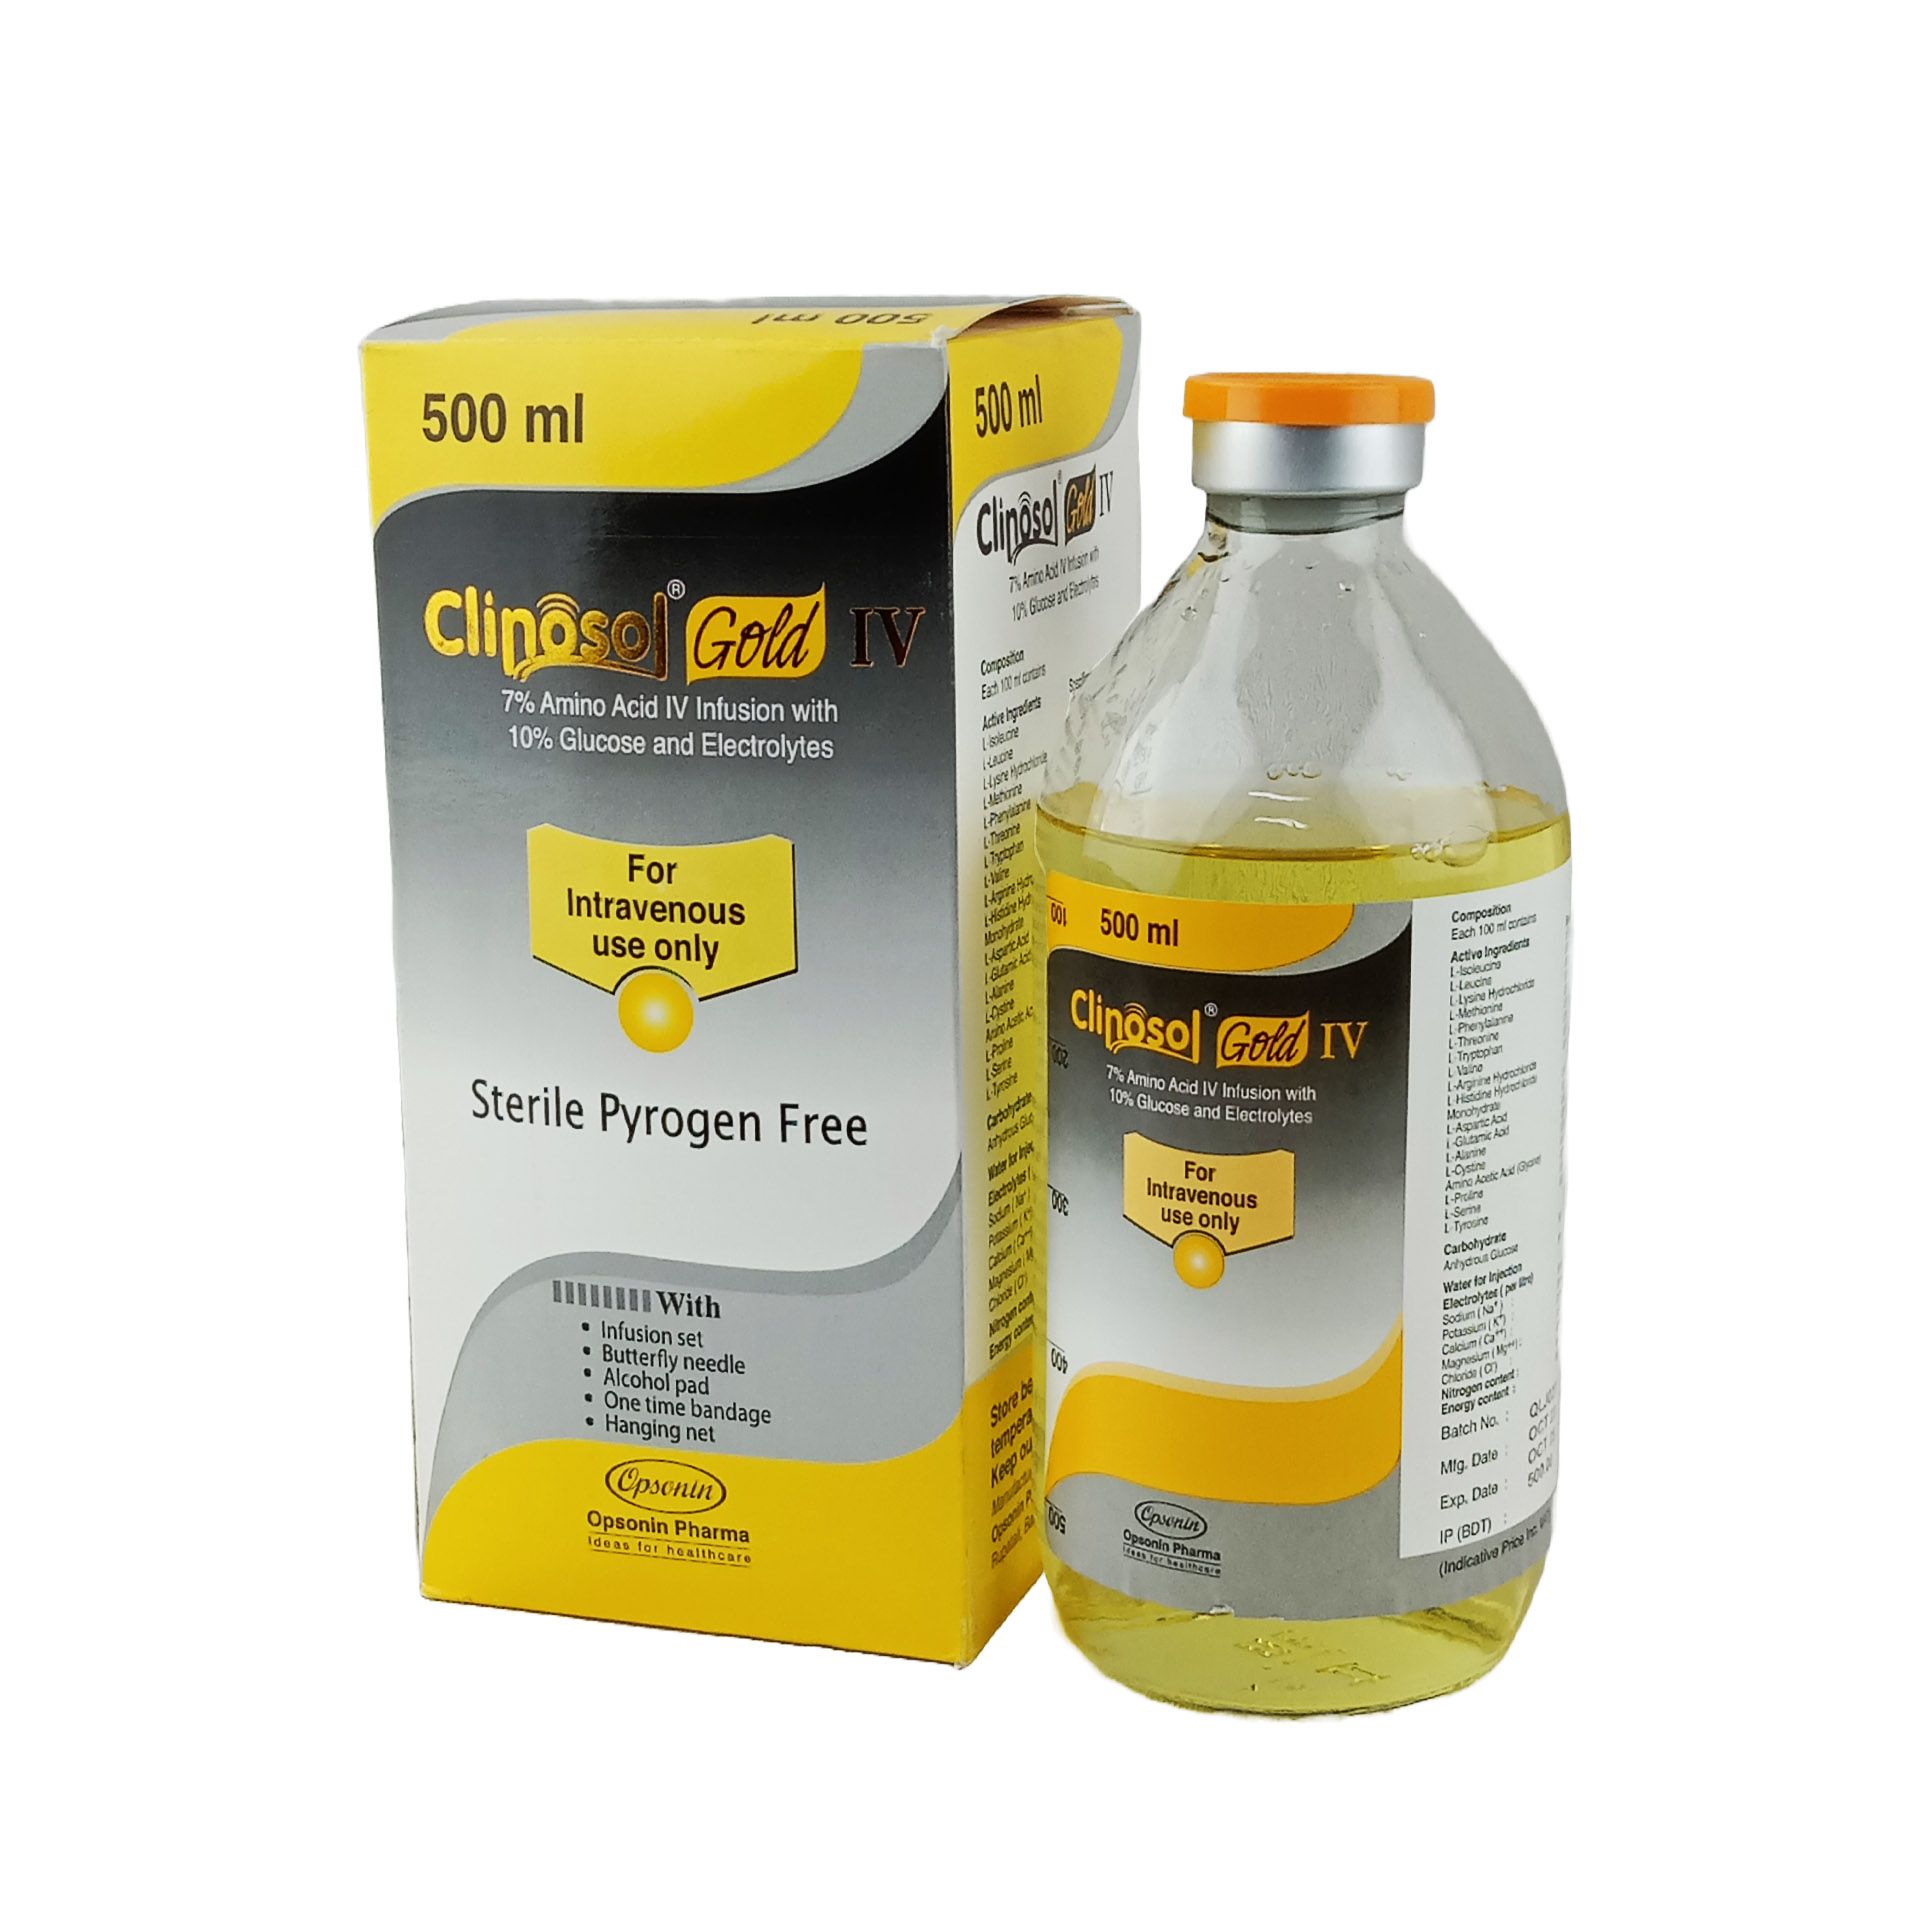 Clinosol Gold 7%+10% Infusion